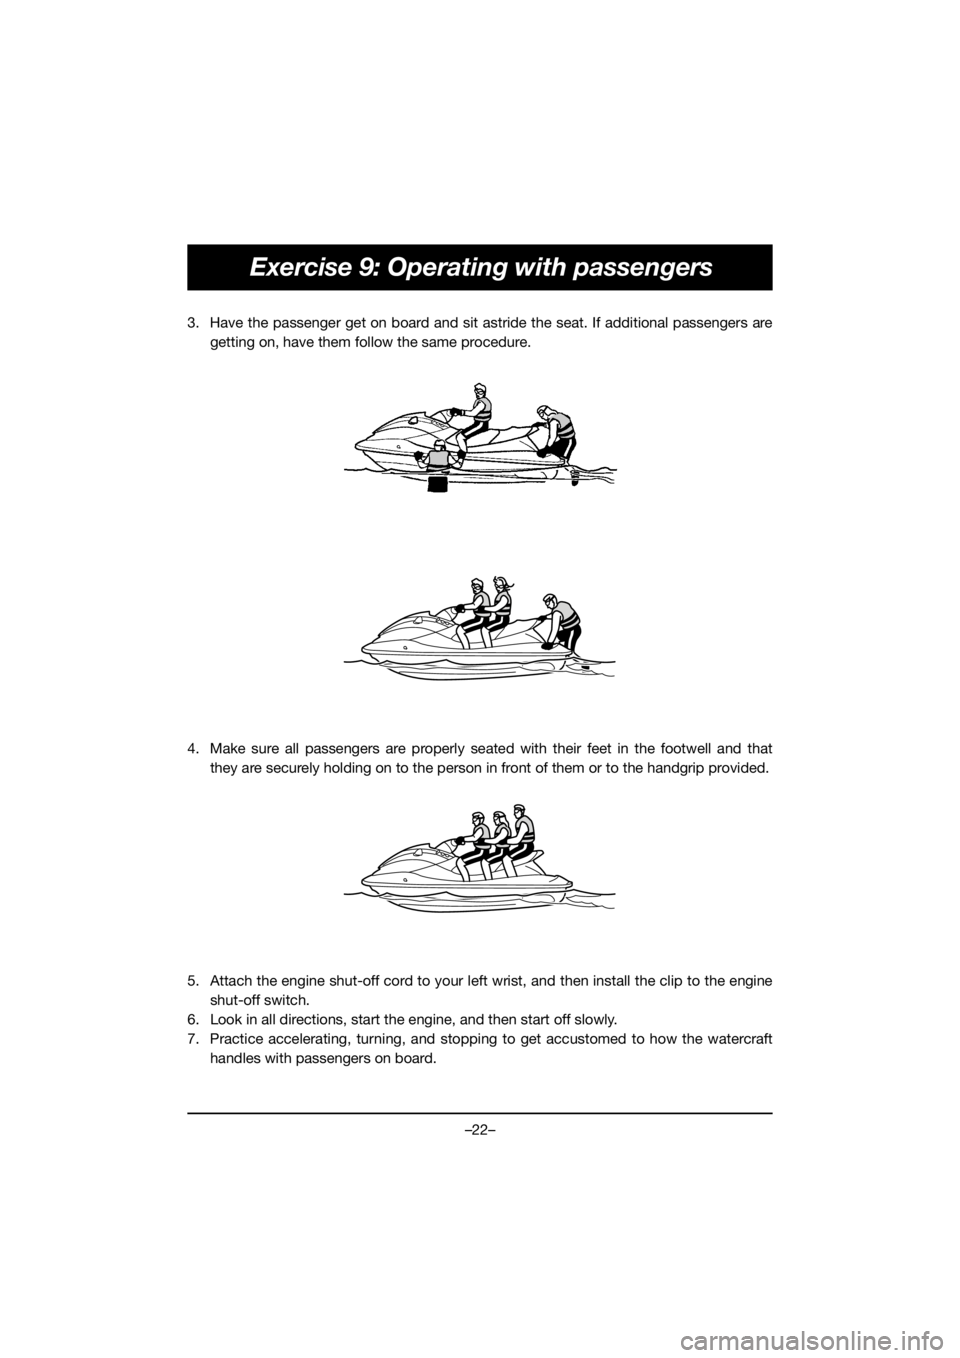 YAMAHA EX 2019  Manual de utilização (in Portuguese) –22–
Exercise 9: Operating with passengers
3. Have the passenger get on board and sit astride the seat. If additional passengers are
getting on, have them follow the same procedure. 
4. Make sure 